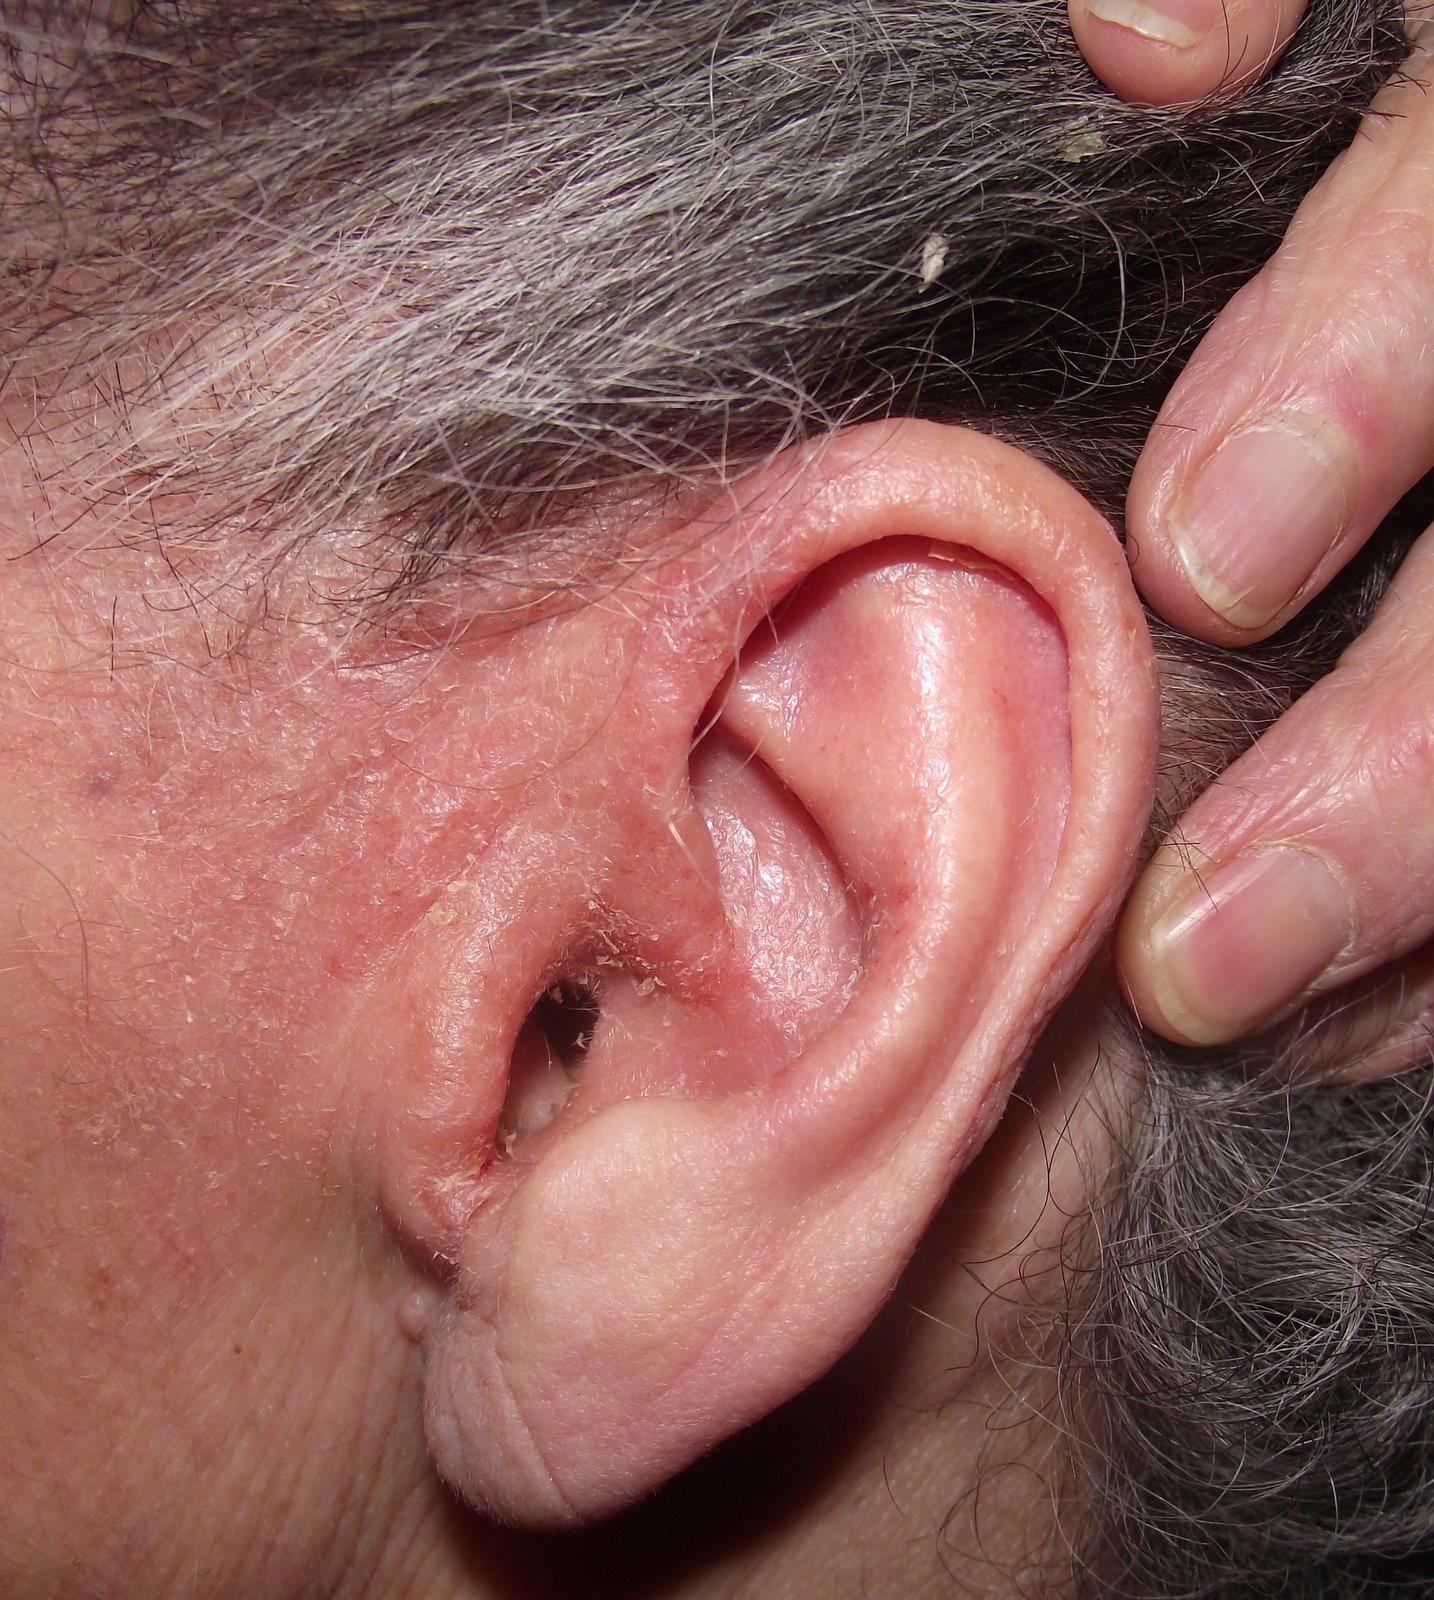 Itchy scalp with rash - RightDiagnosis.com